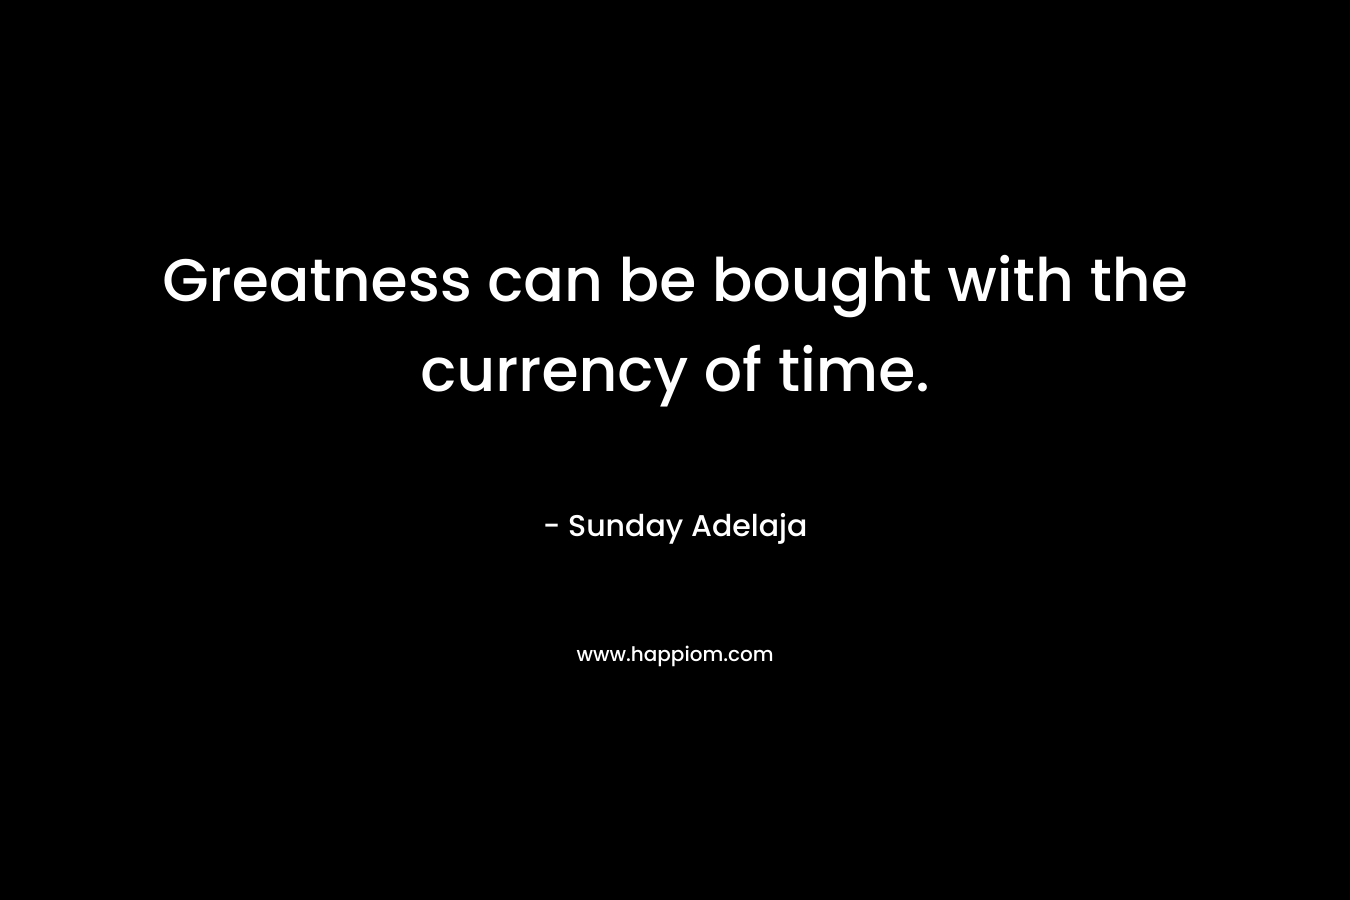 Greatness can be bought with the currency of time.